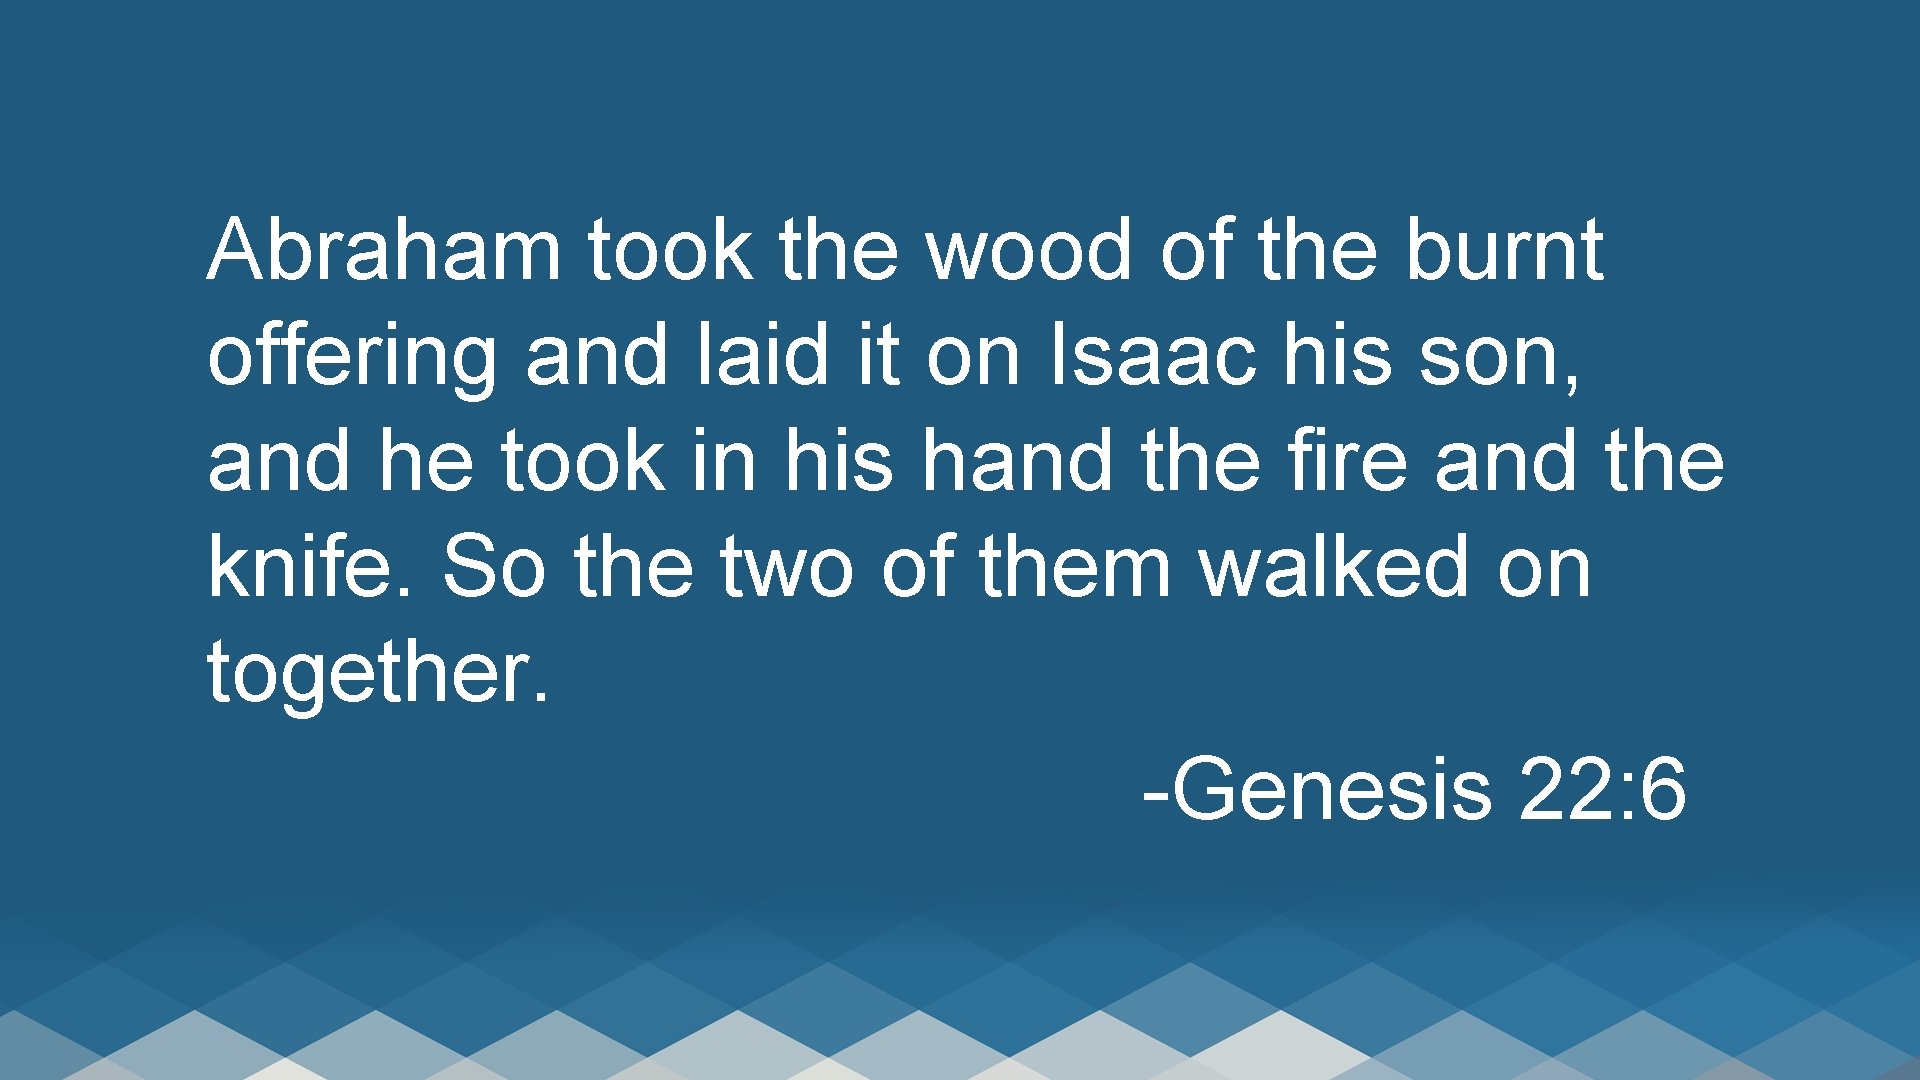 Abraham took the wood of the burnt offering and laid it on Isaac his